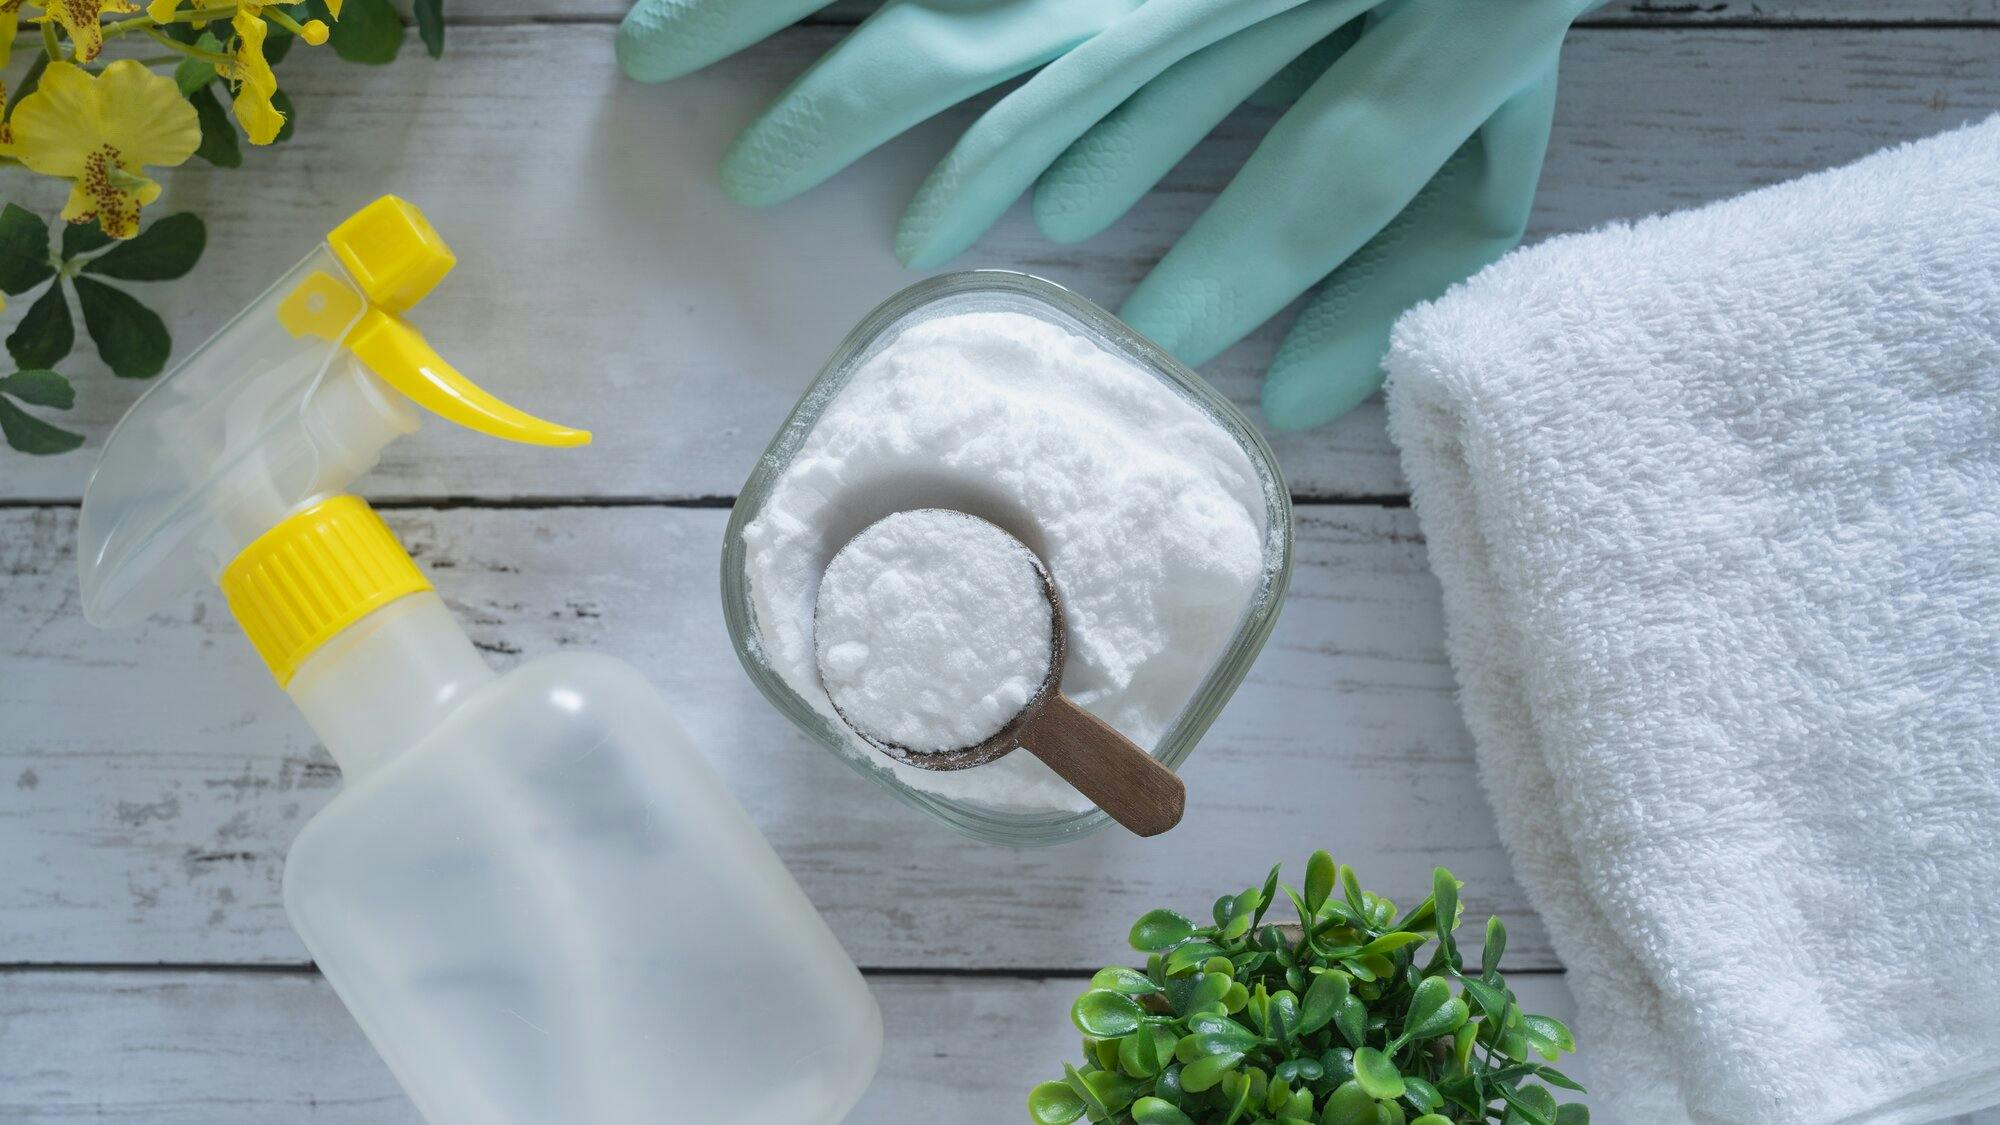 Spray bottle, cleaning gloves, baking soda, and a towel